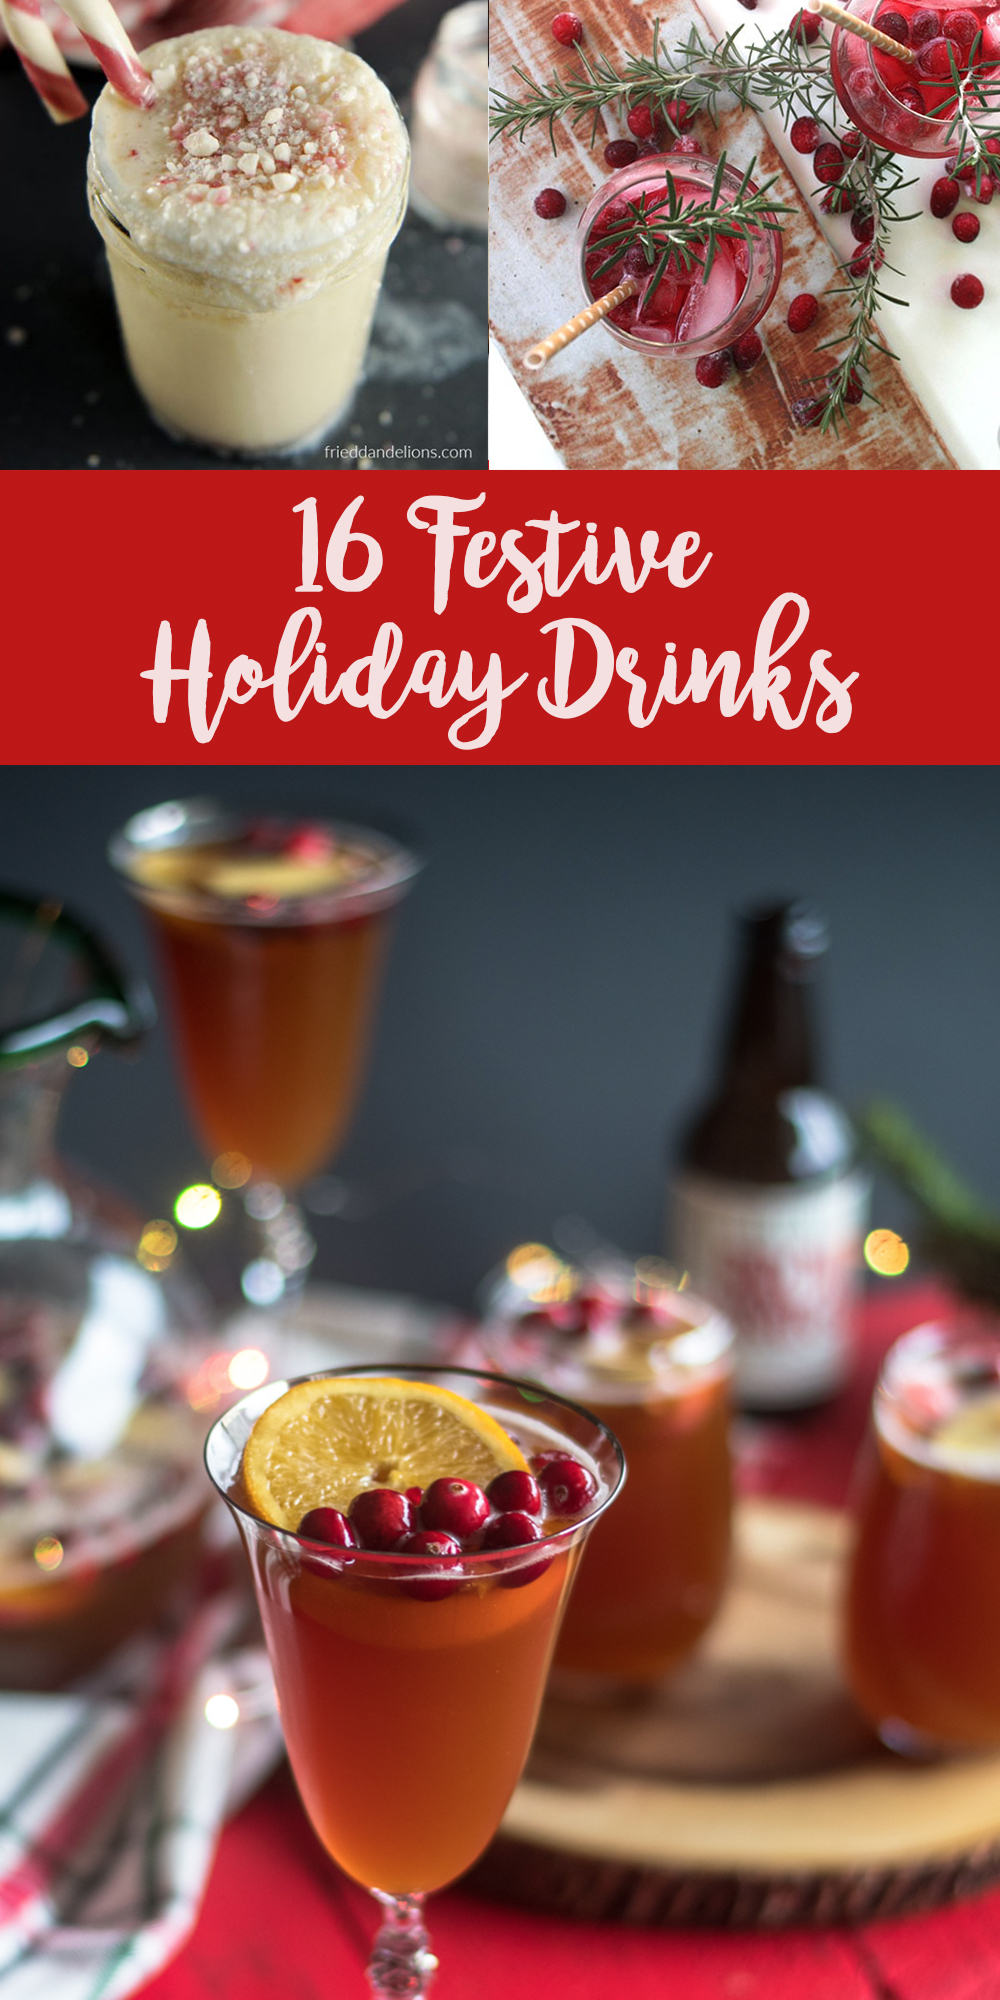 Make your holiday party extra special by serving one of these delicious festive drinks! #holiday #drinks #cocktails #festive #Christmas #vegan #dairyfree #veganrecipes 